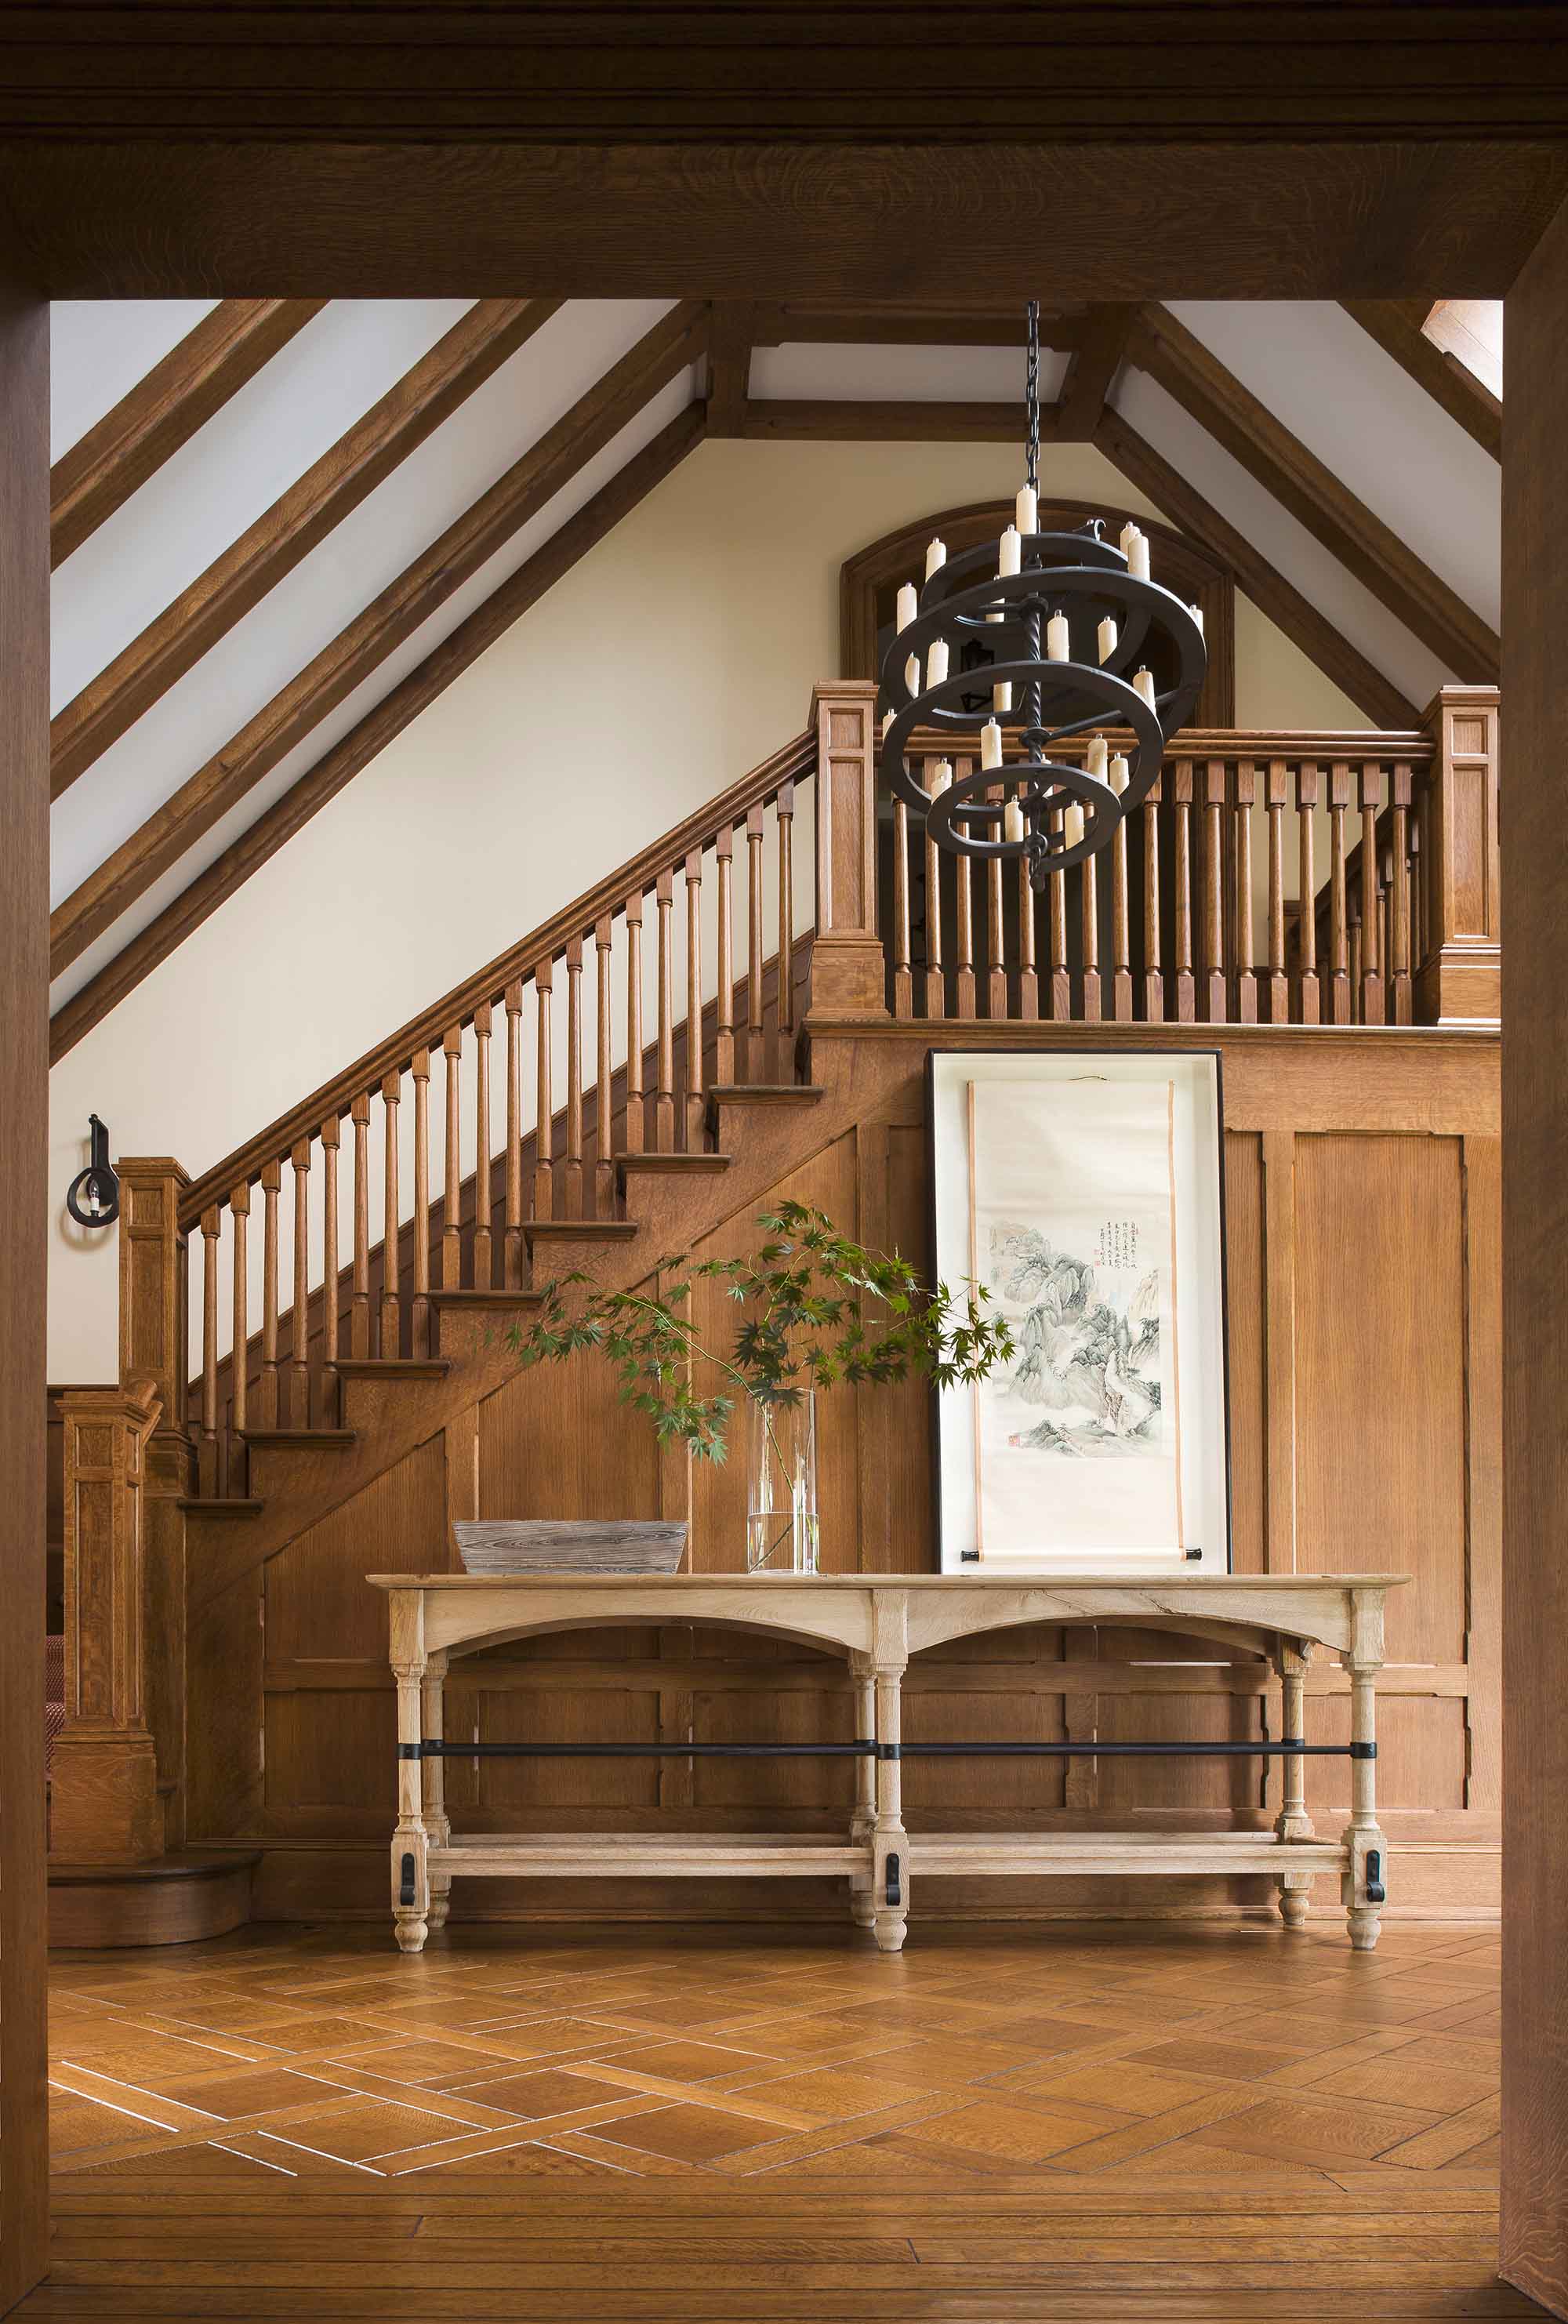 Arts & Crafts style, Nissequogue, Long Island, Stair hall, wood panel